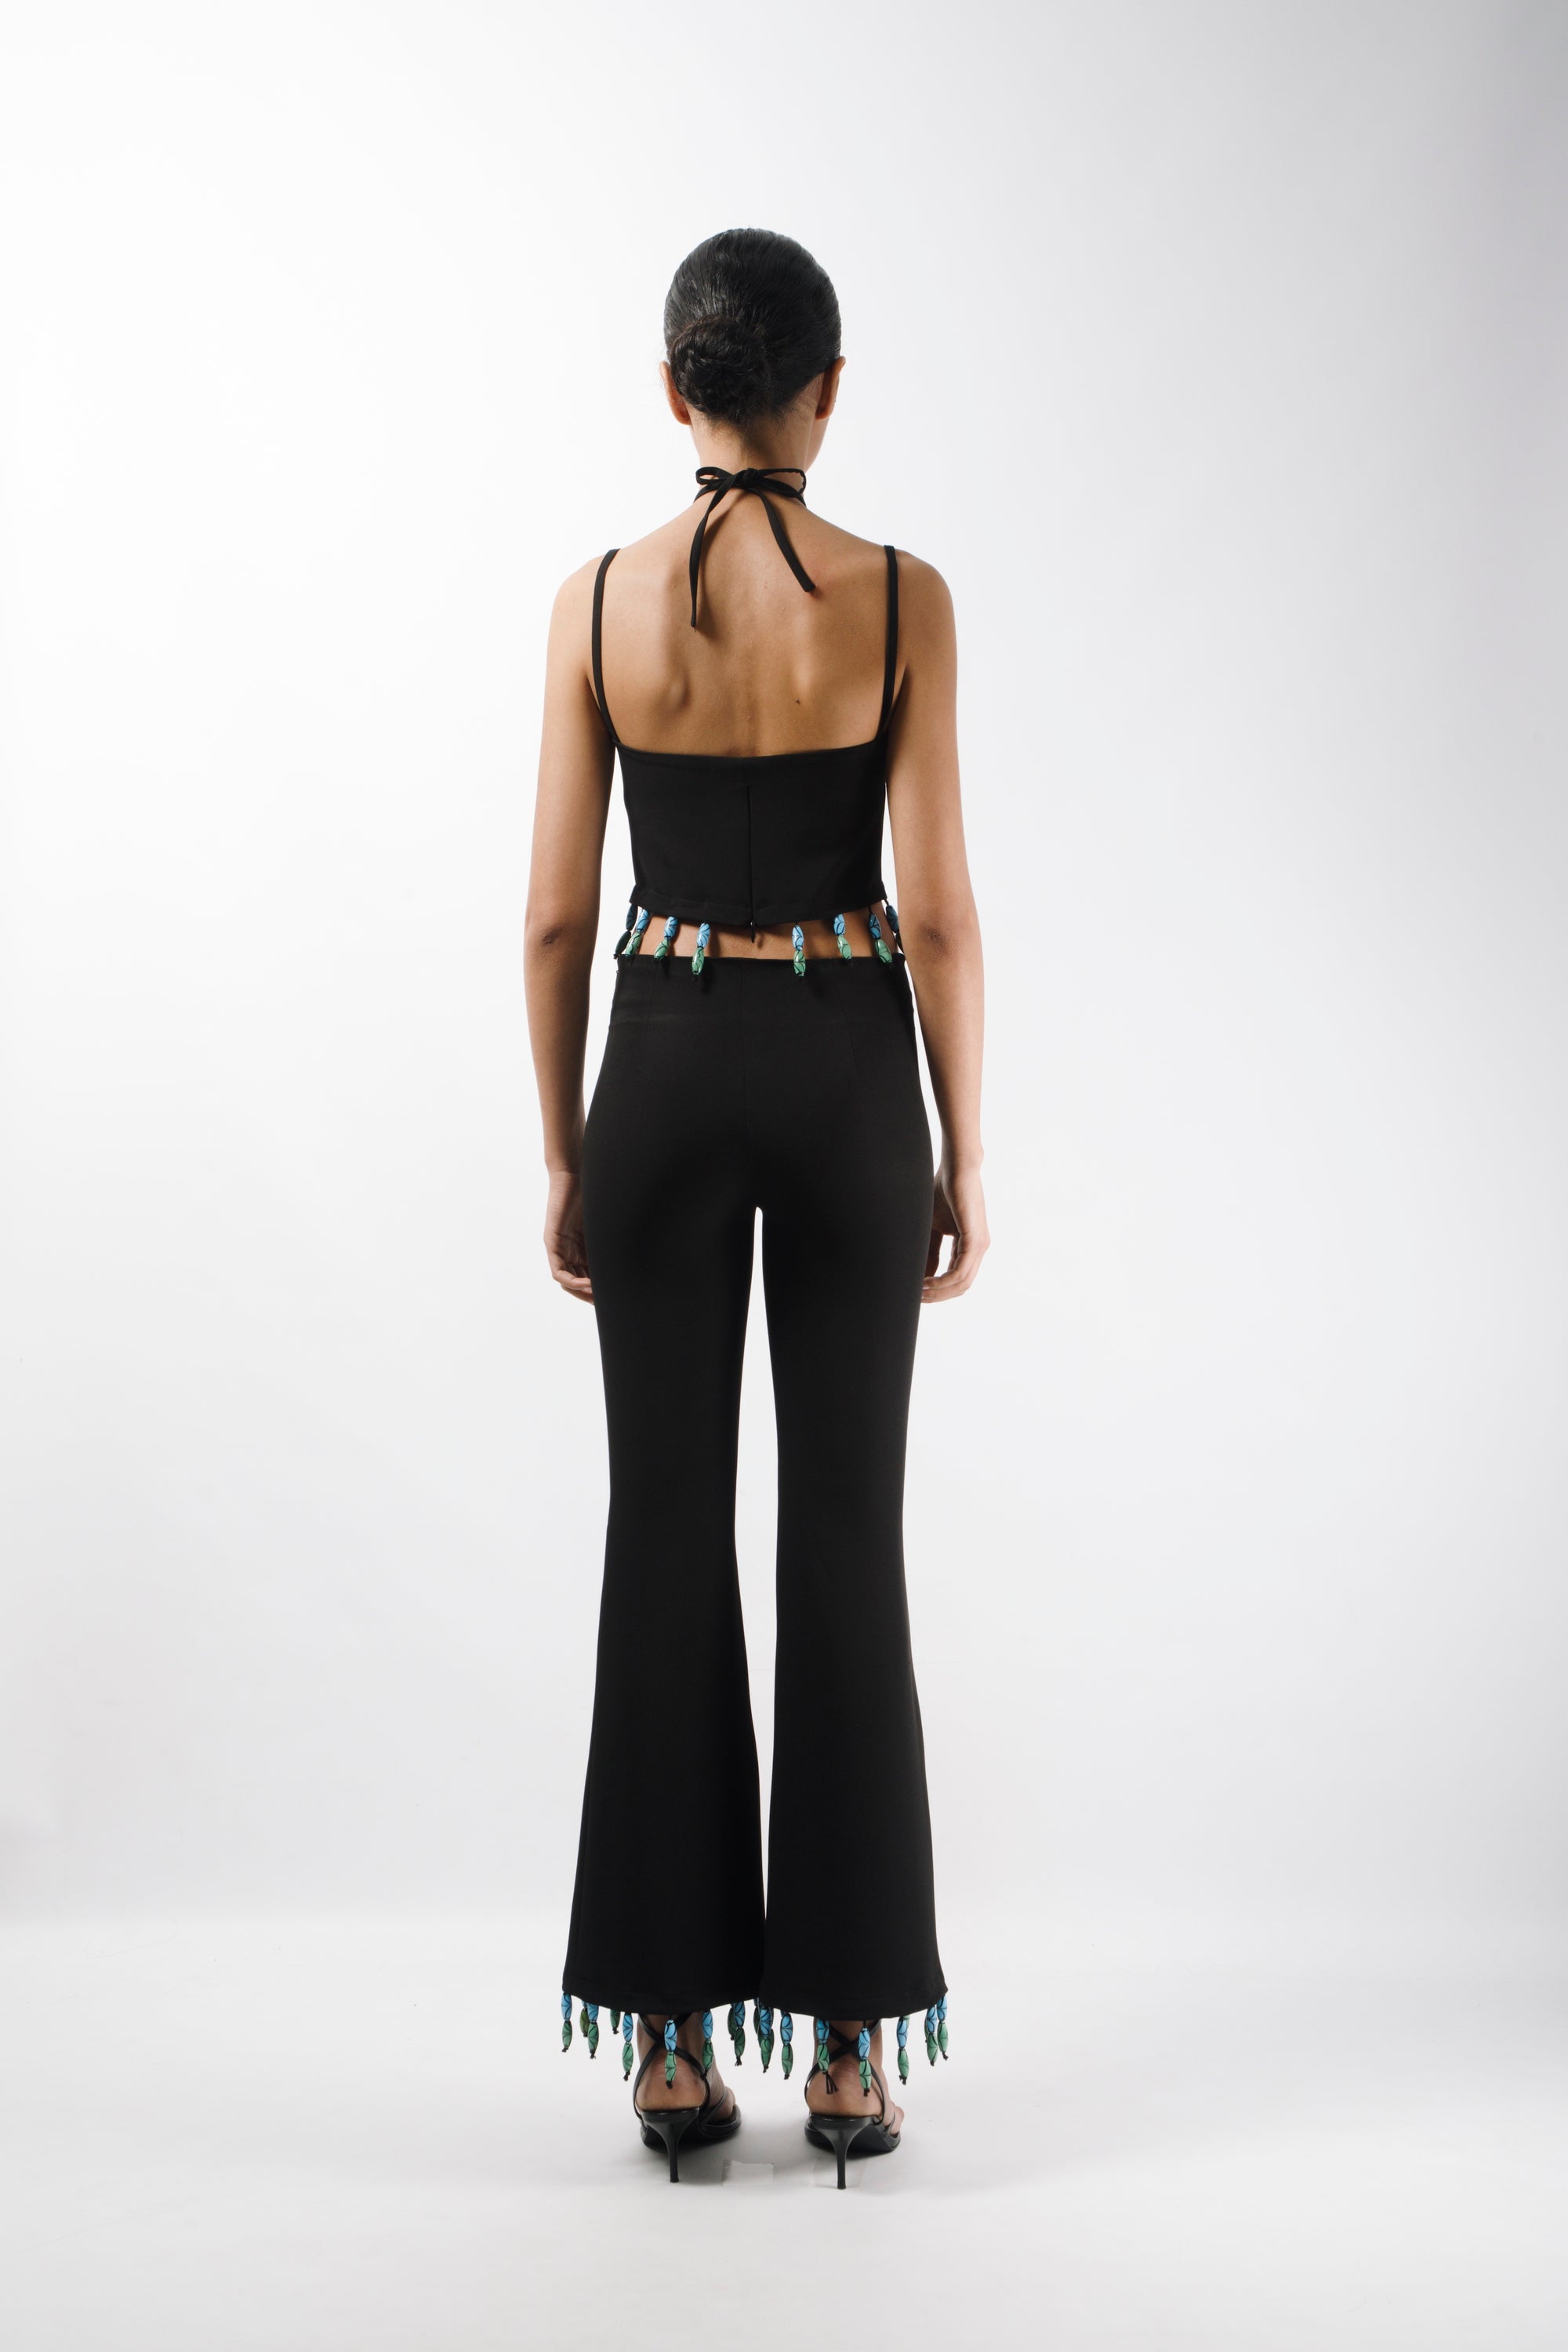 Tailored pants featuring mid rise waist and flared leg, embelished with bead fringes on the hem - back